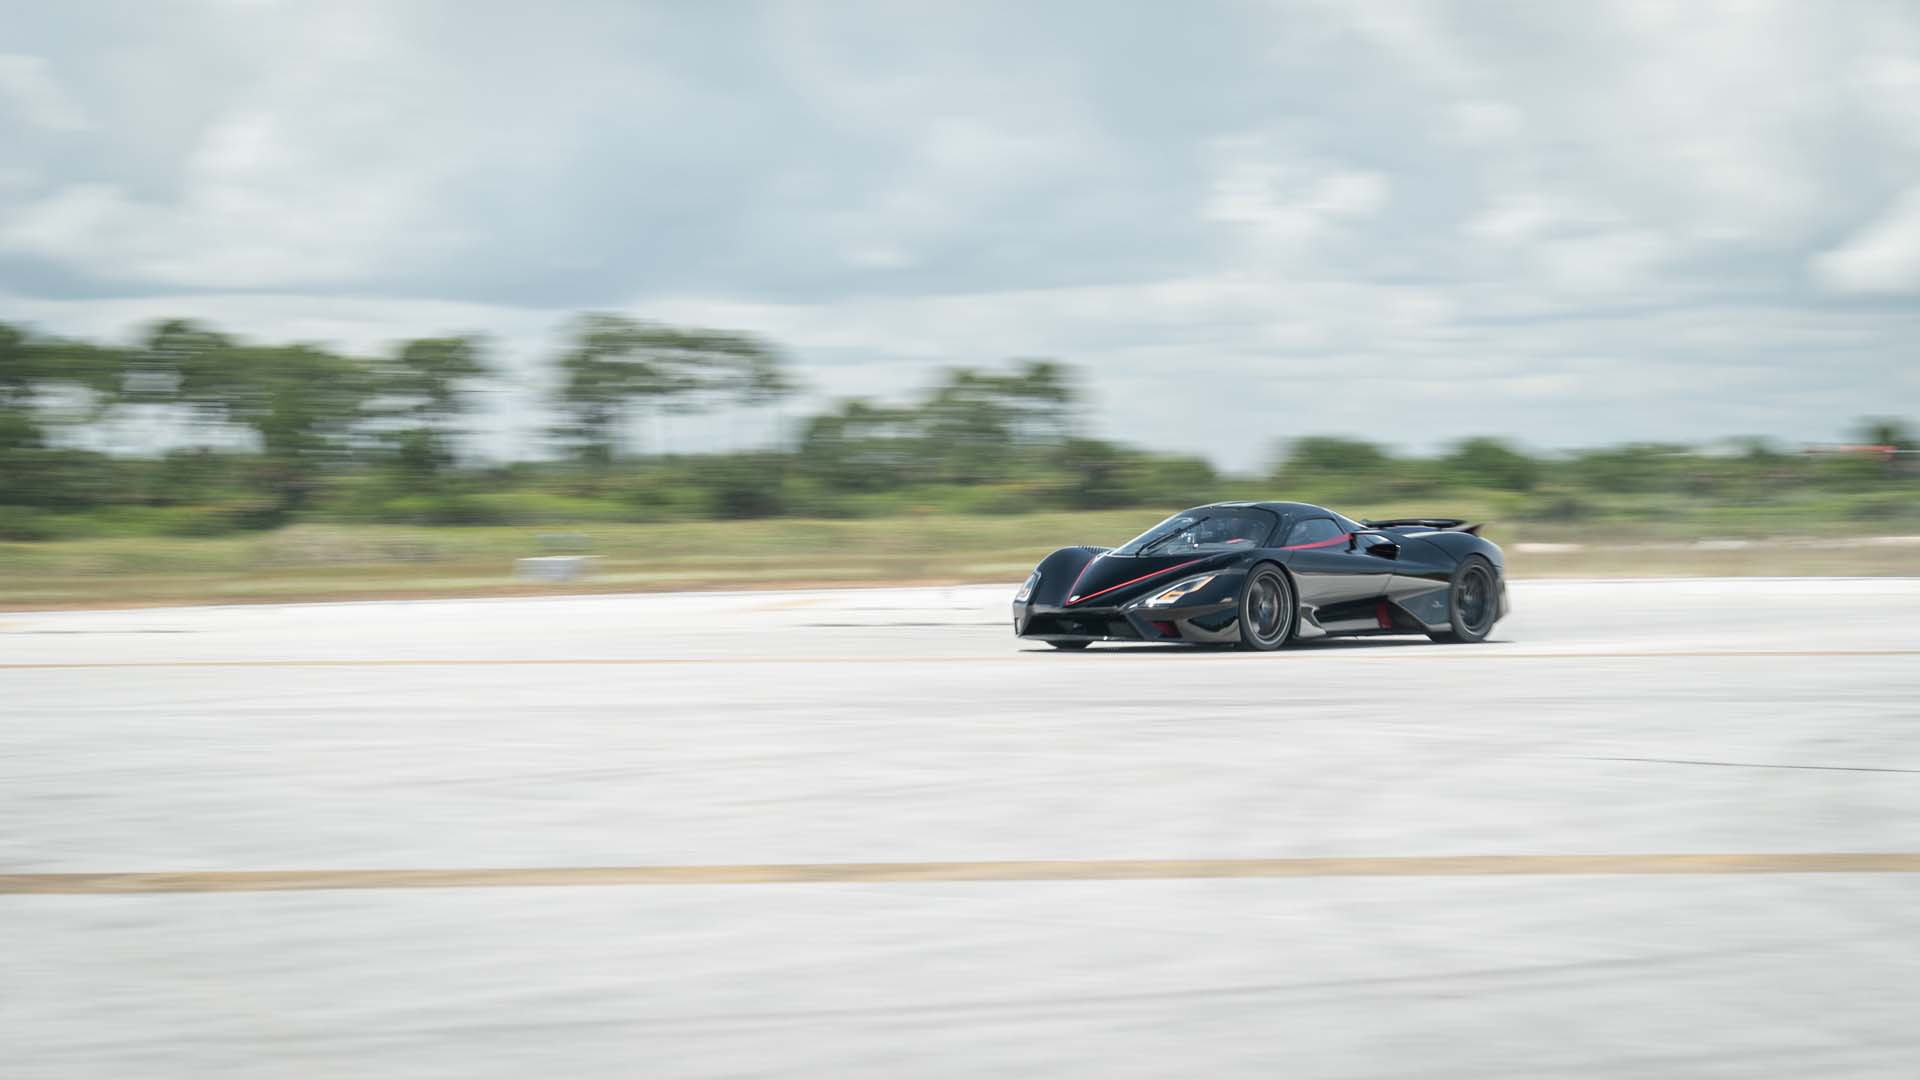 2021 SSC Tuatara hits 295 mph during speed record attempt, May 2022